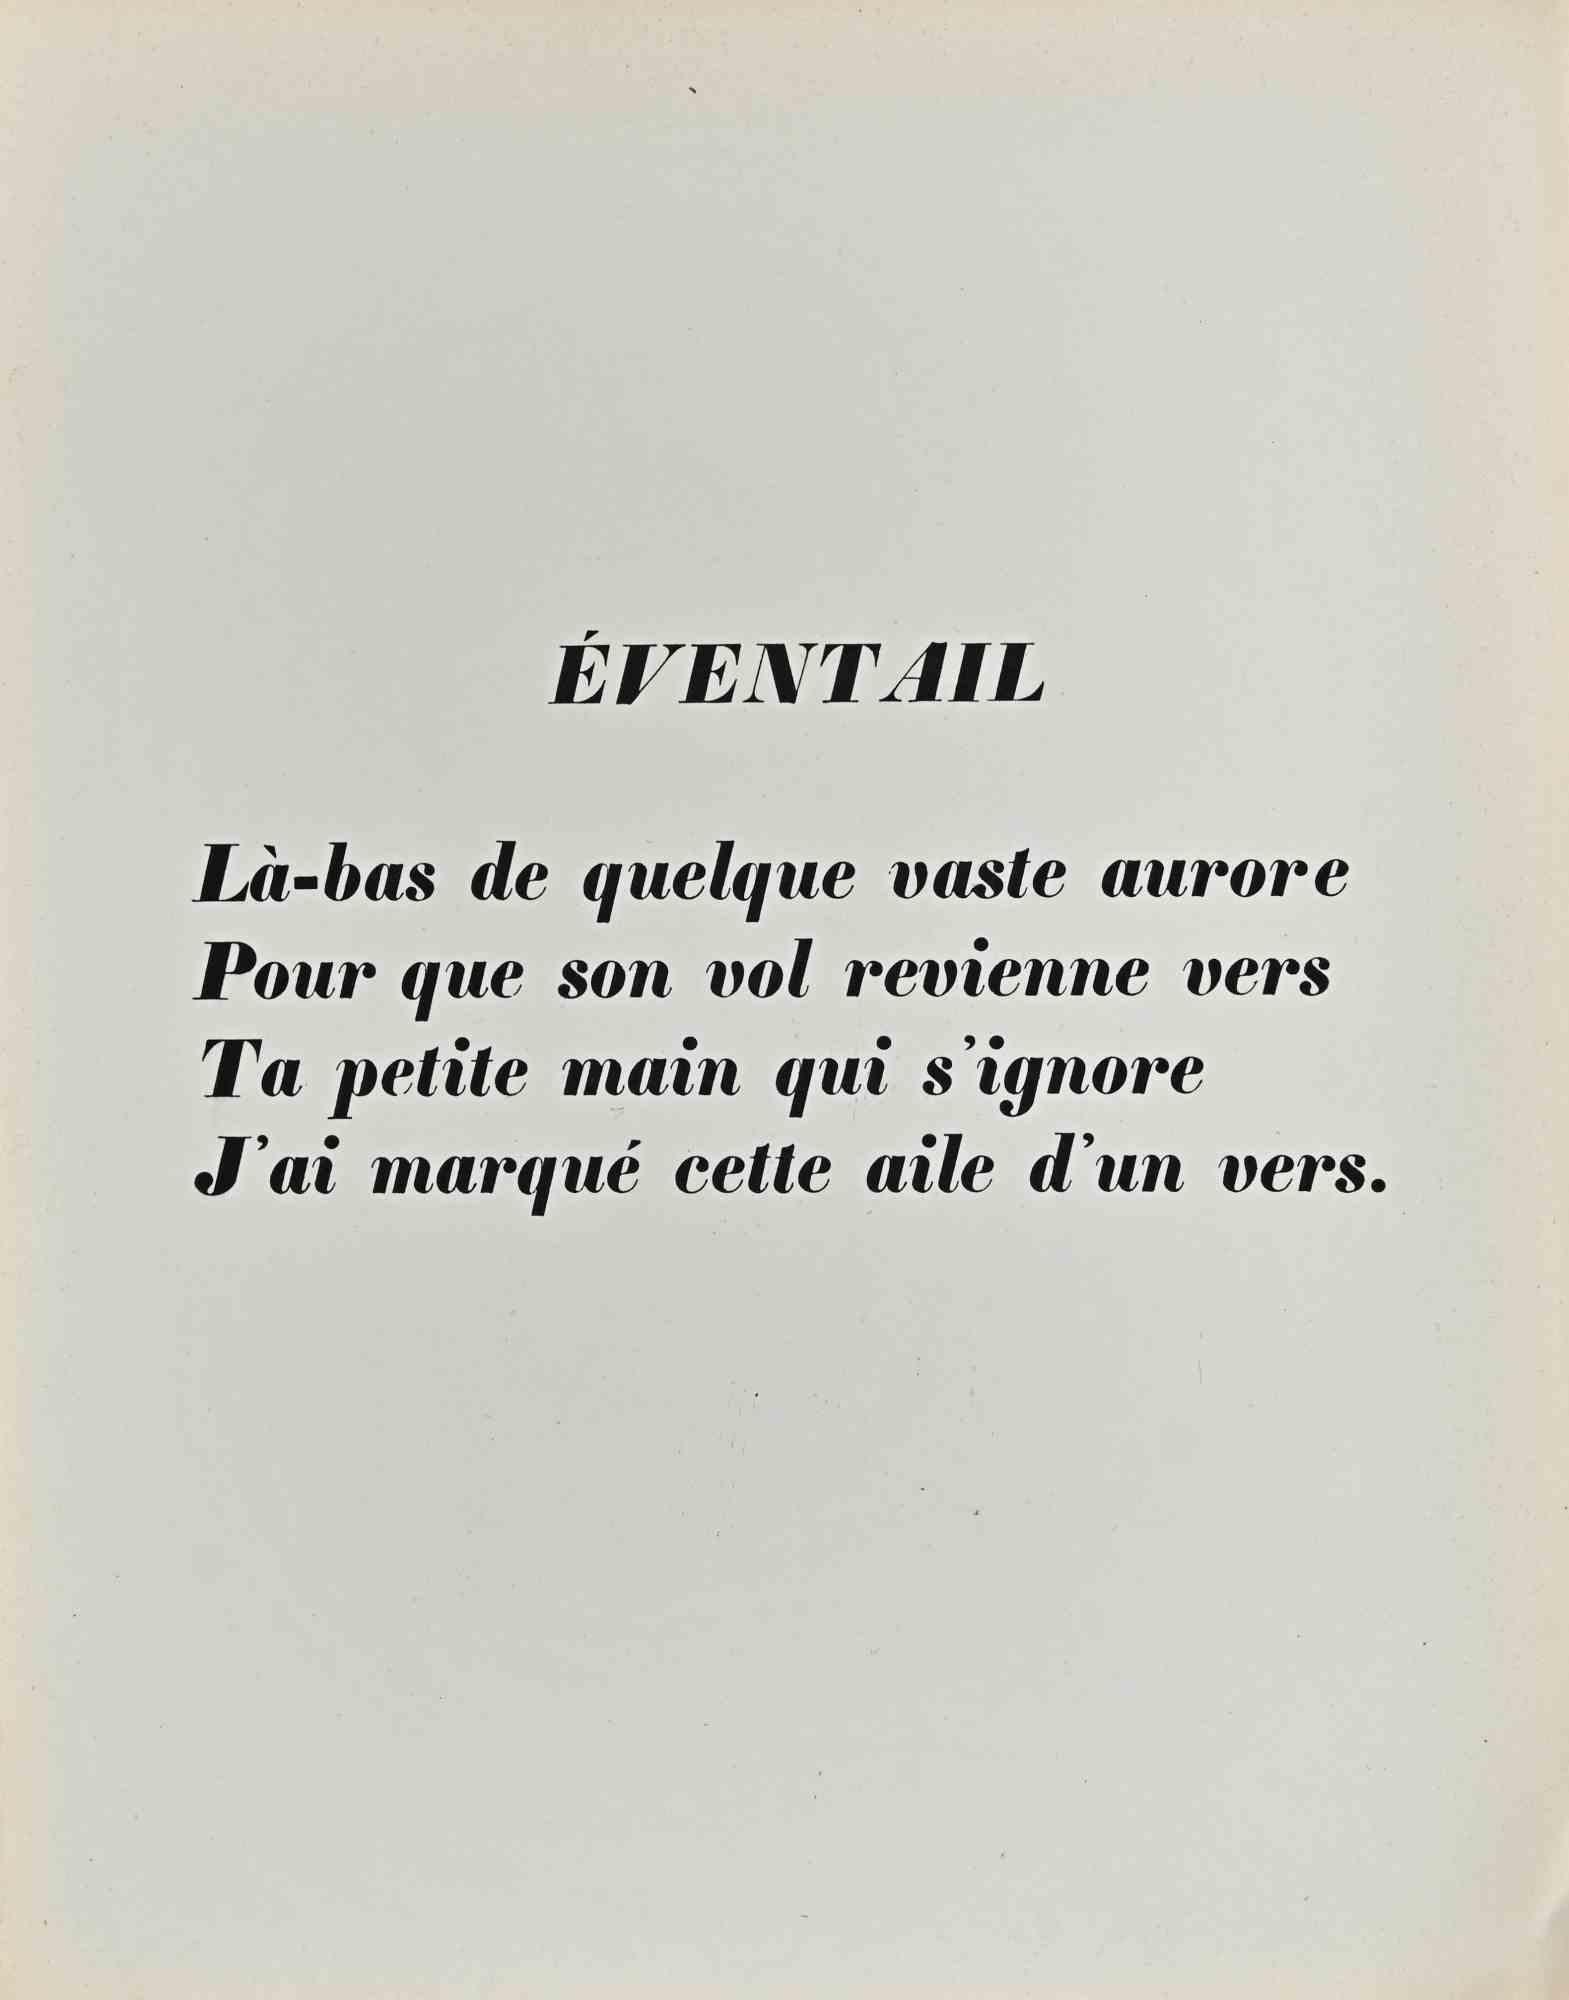 Eventail – Lithographie von Raoul Dufy – 1920 im Angebot 1